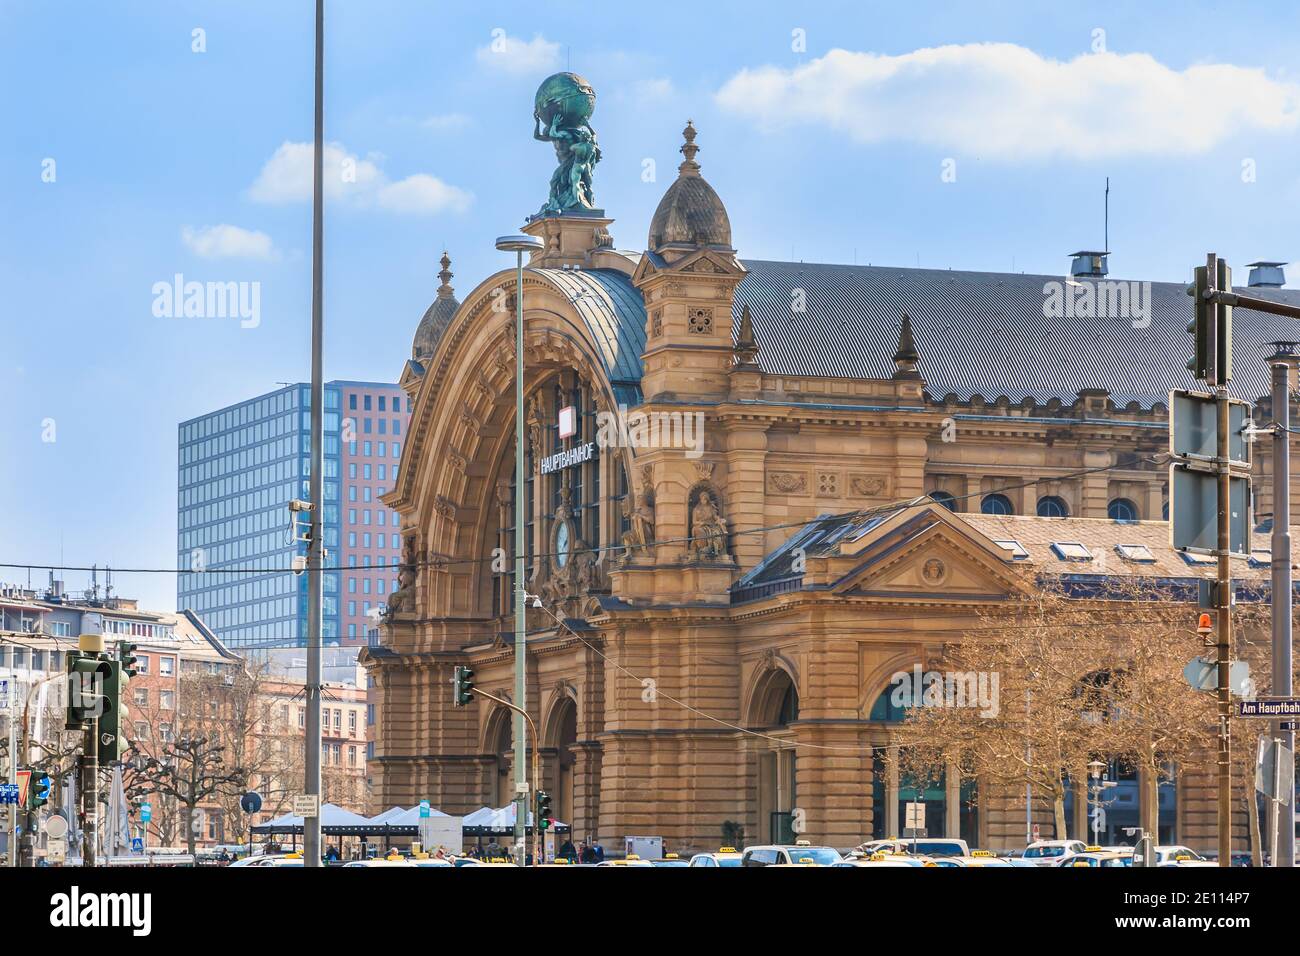 Building from the main train station in Frankfurt. Historic building in springtime with blue sky with clouds. Downtown buildings. City view with lamps Stock Photo